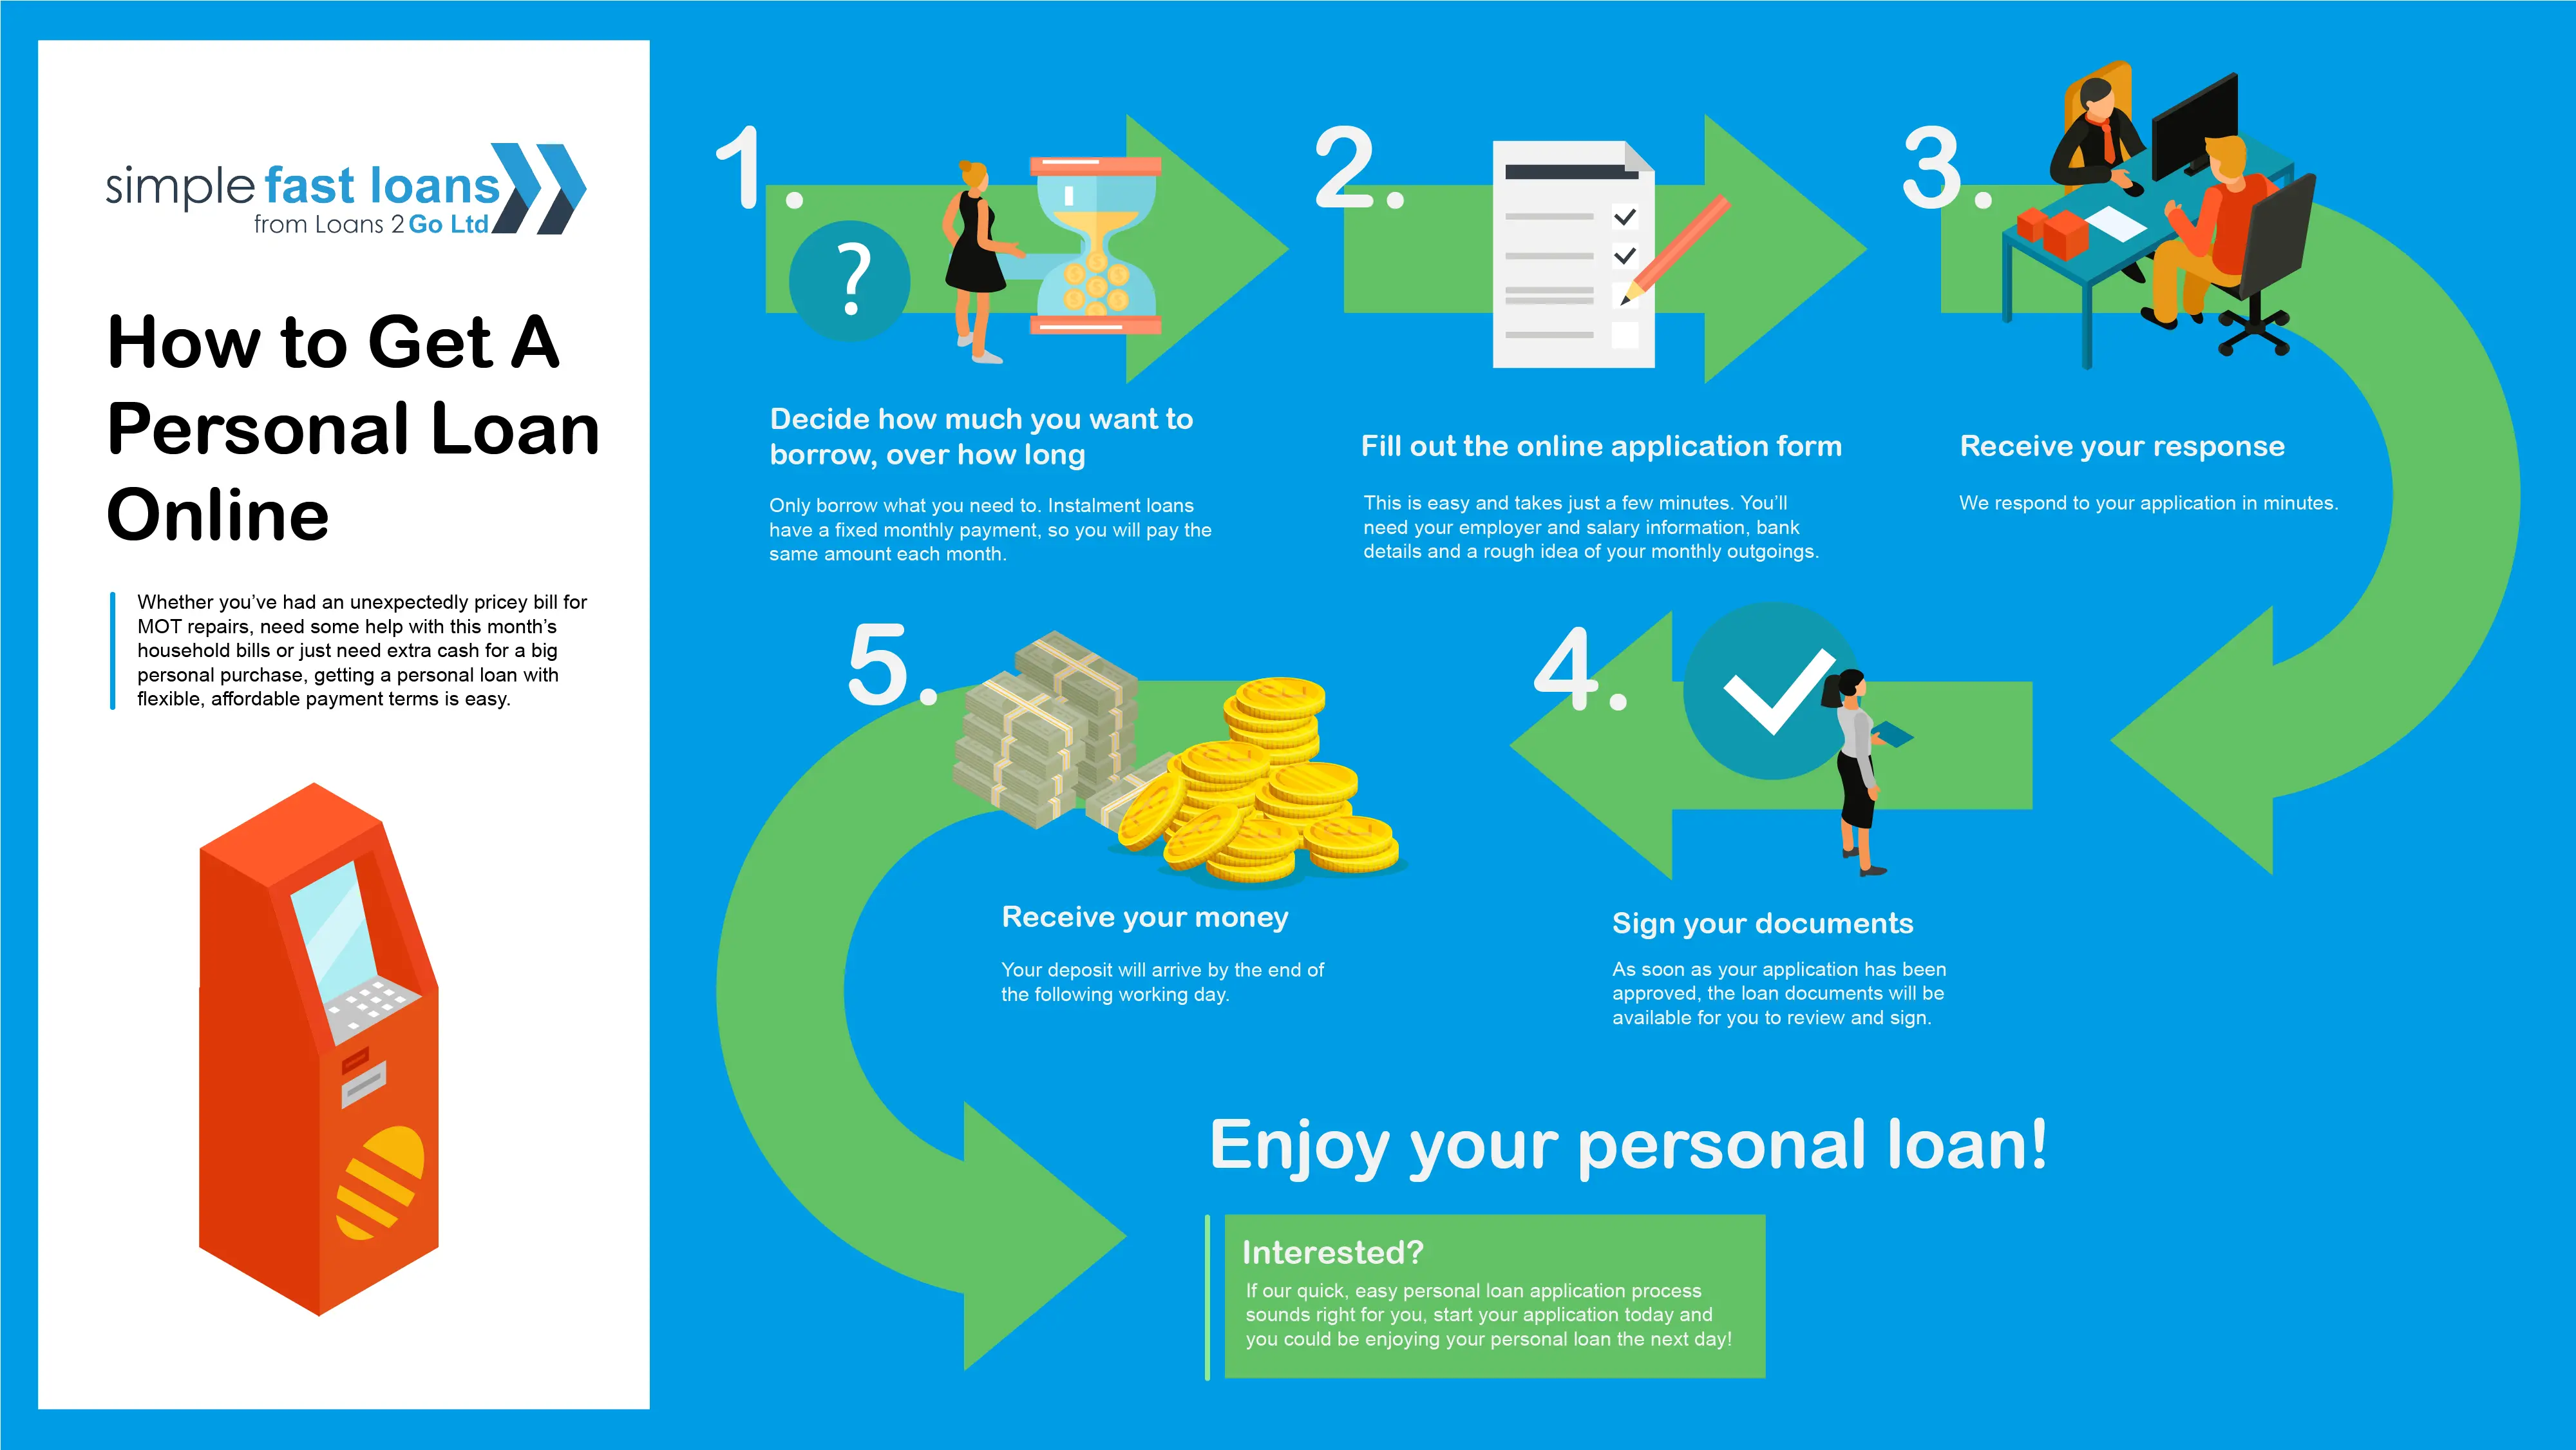 How to Get a Personal Loan Online